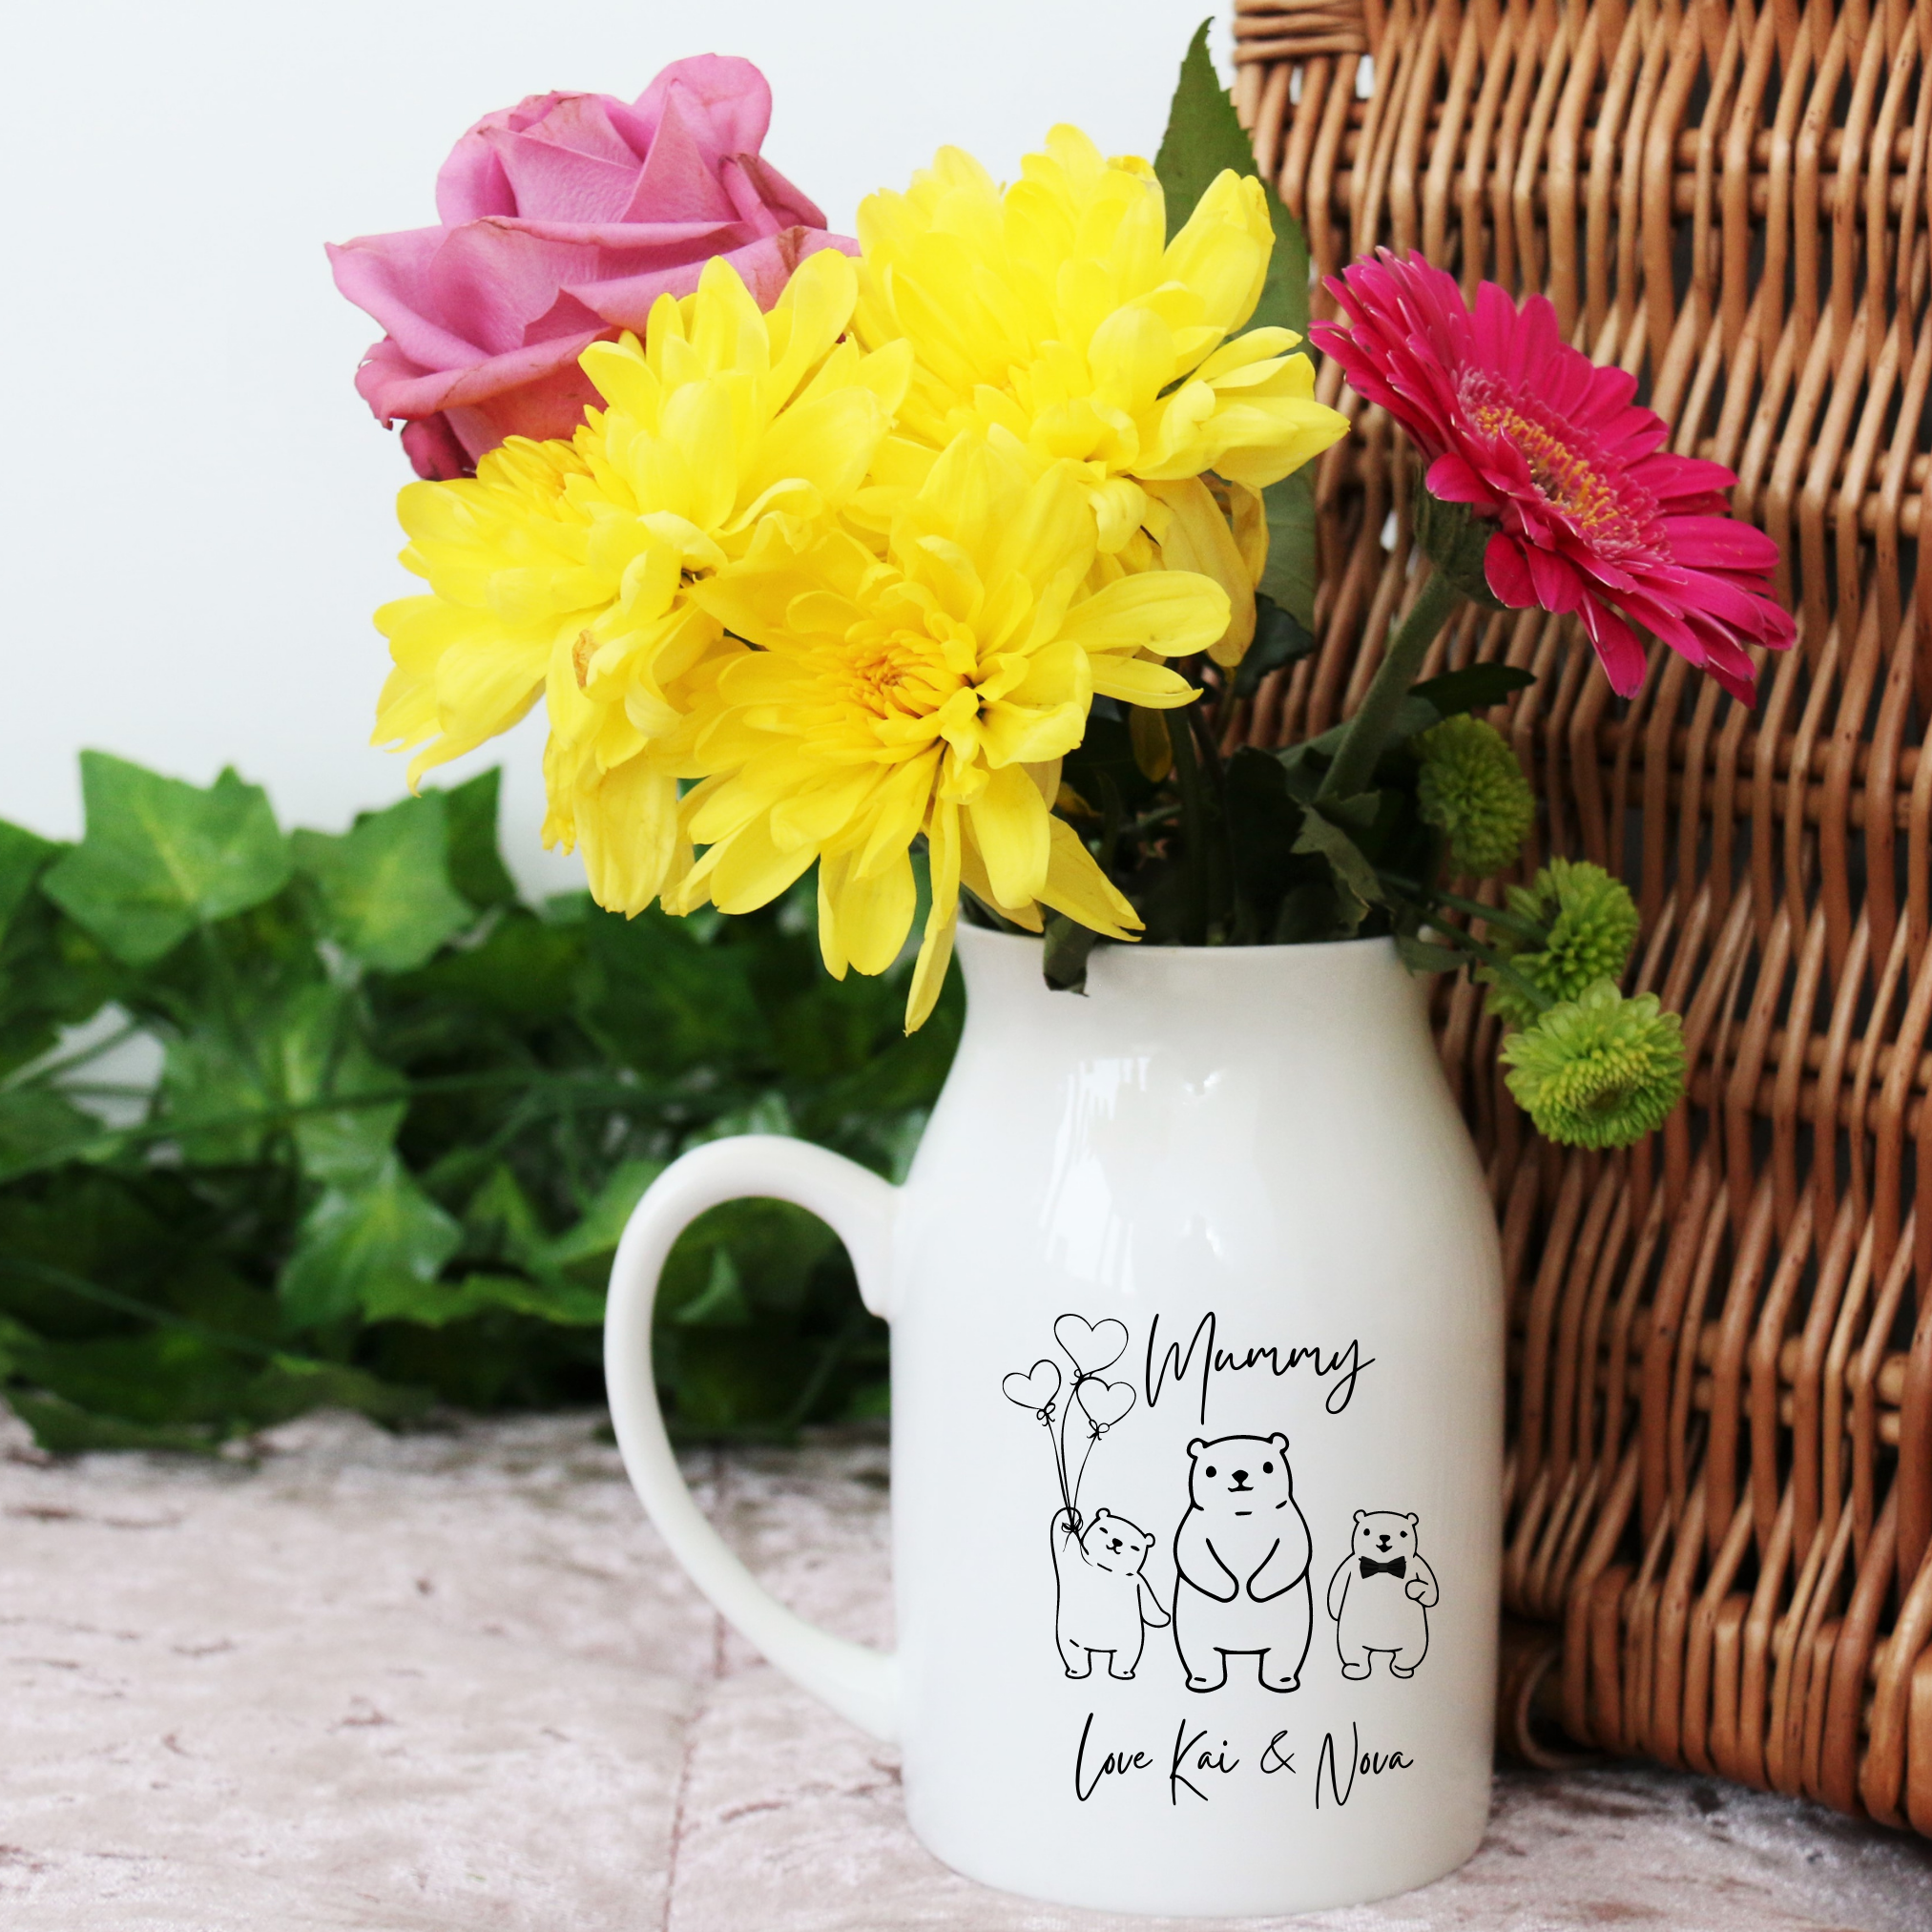 Personalised Family Tree Vase For Mothers Day